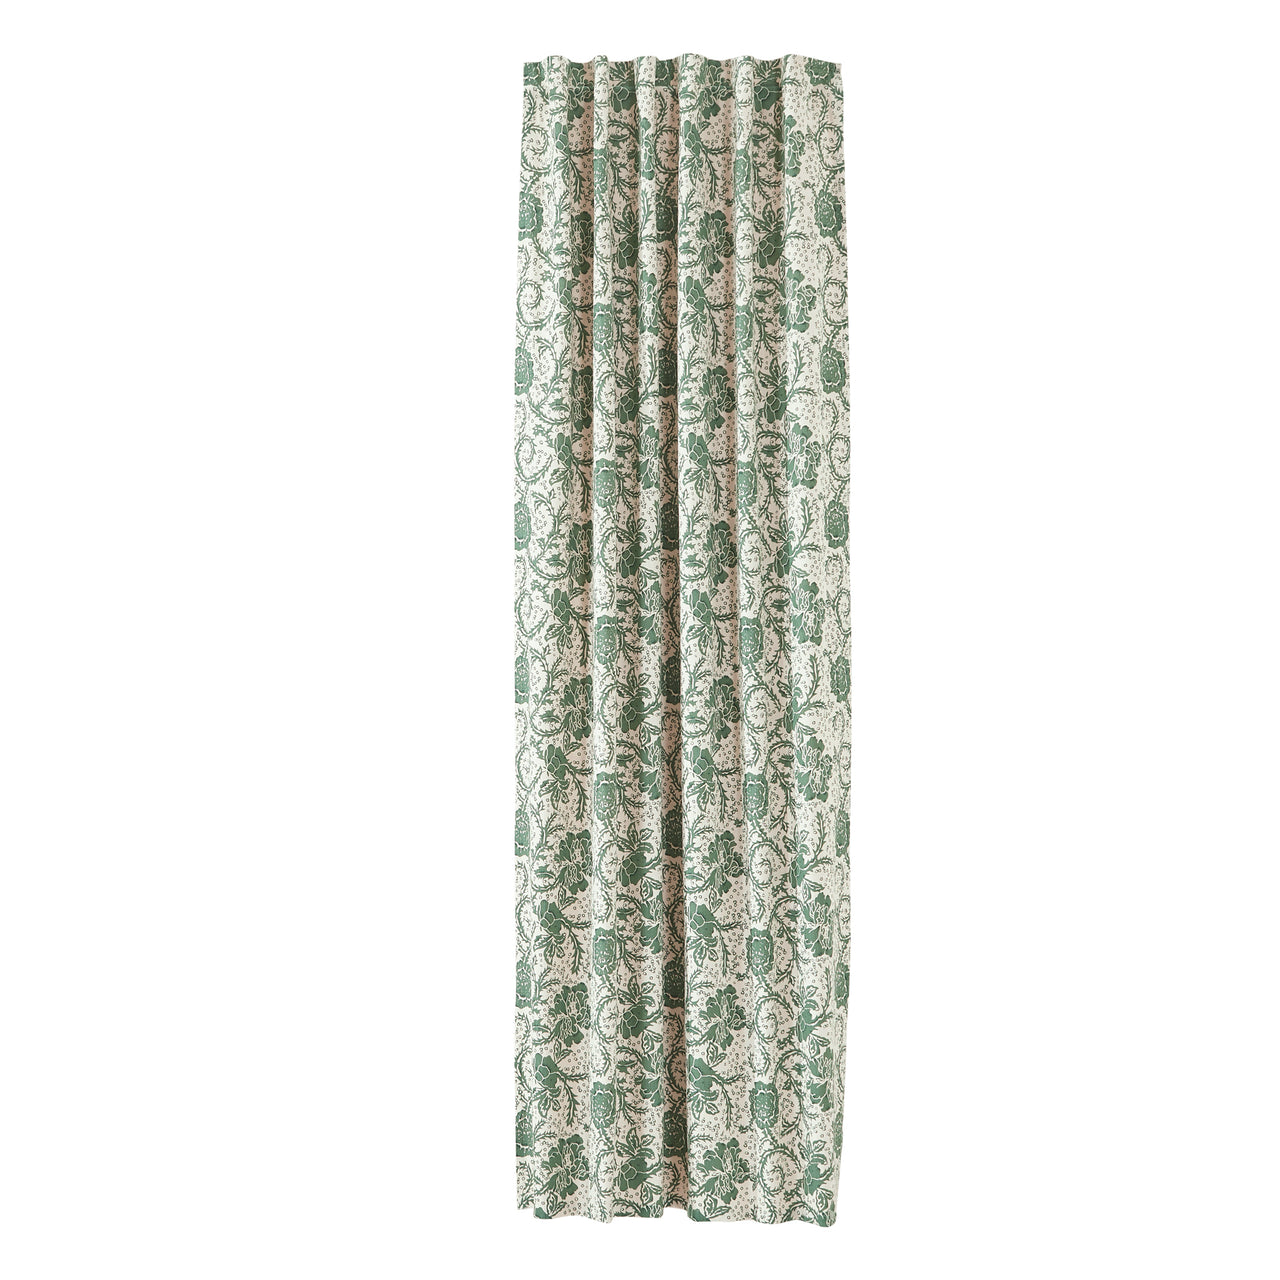 Dorset Green Floral Panel Curtain 96"x50" VHC Brands